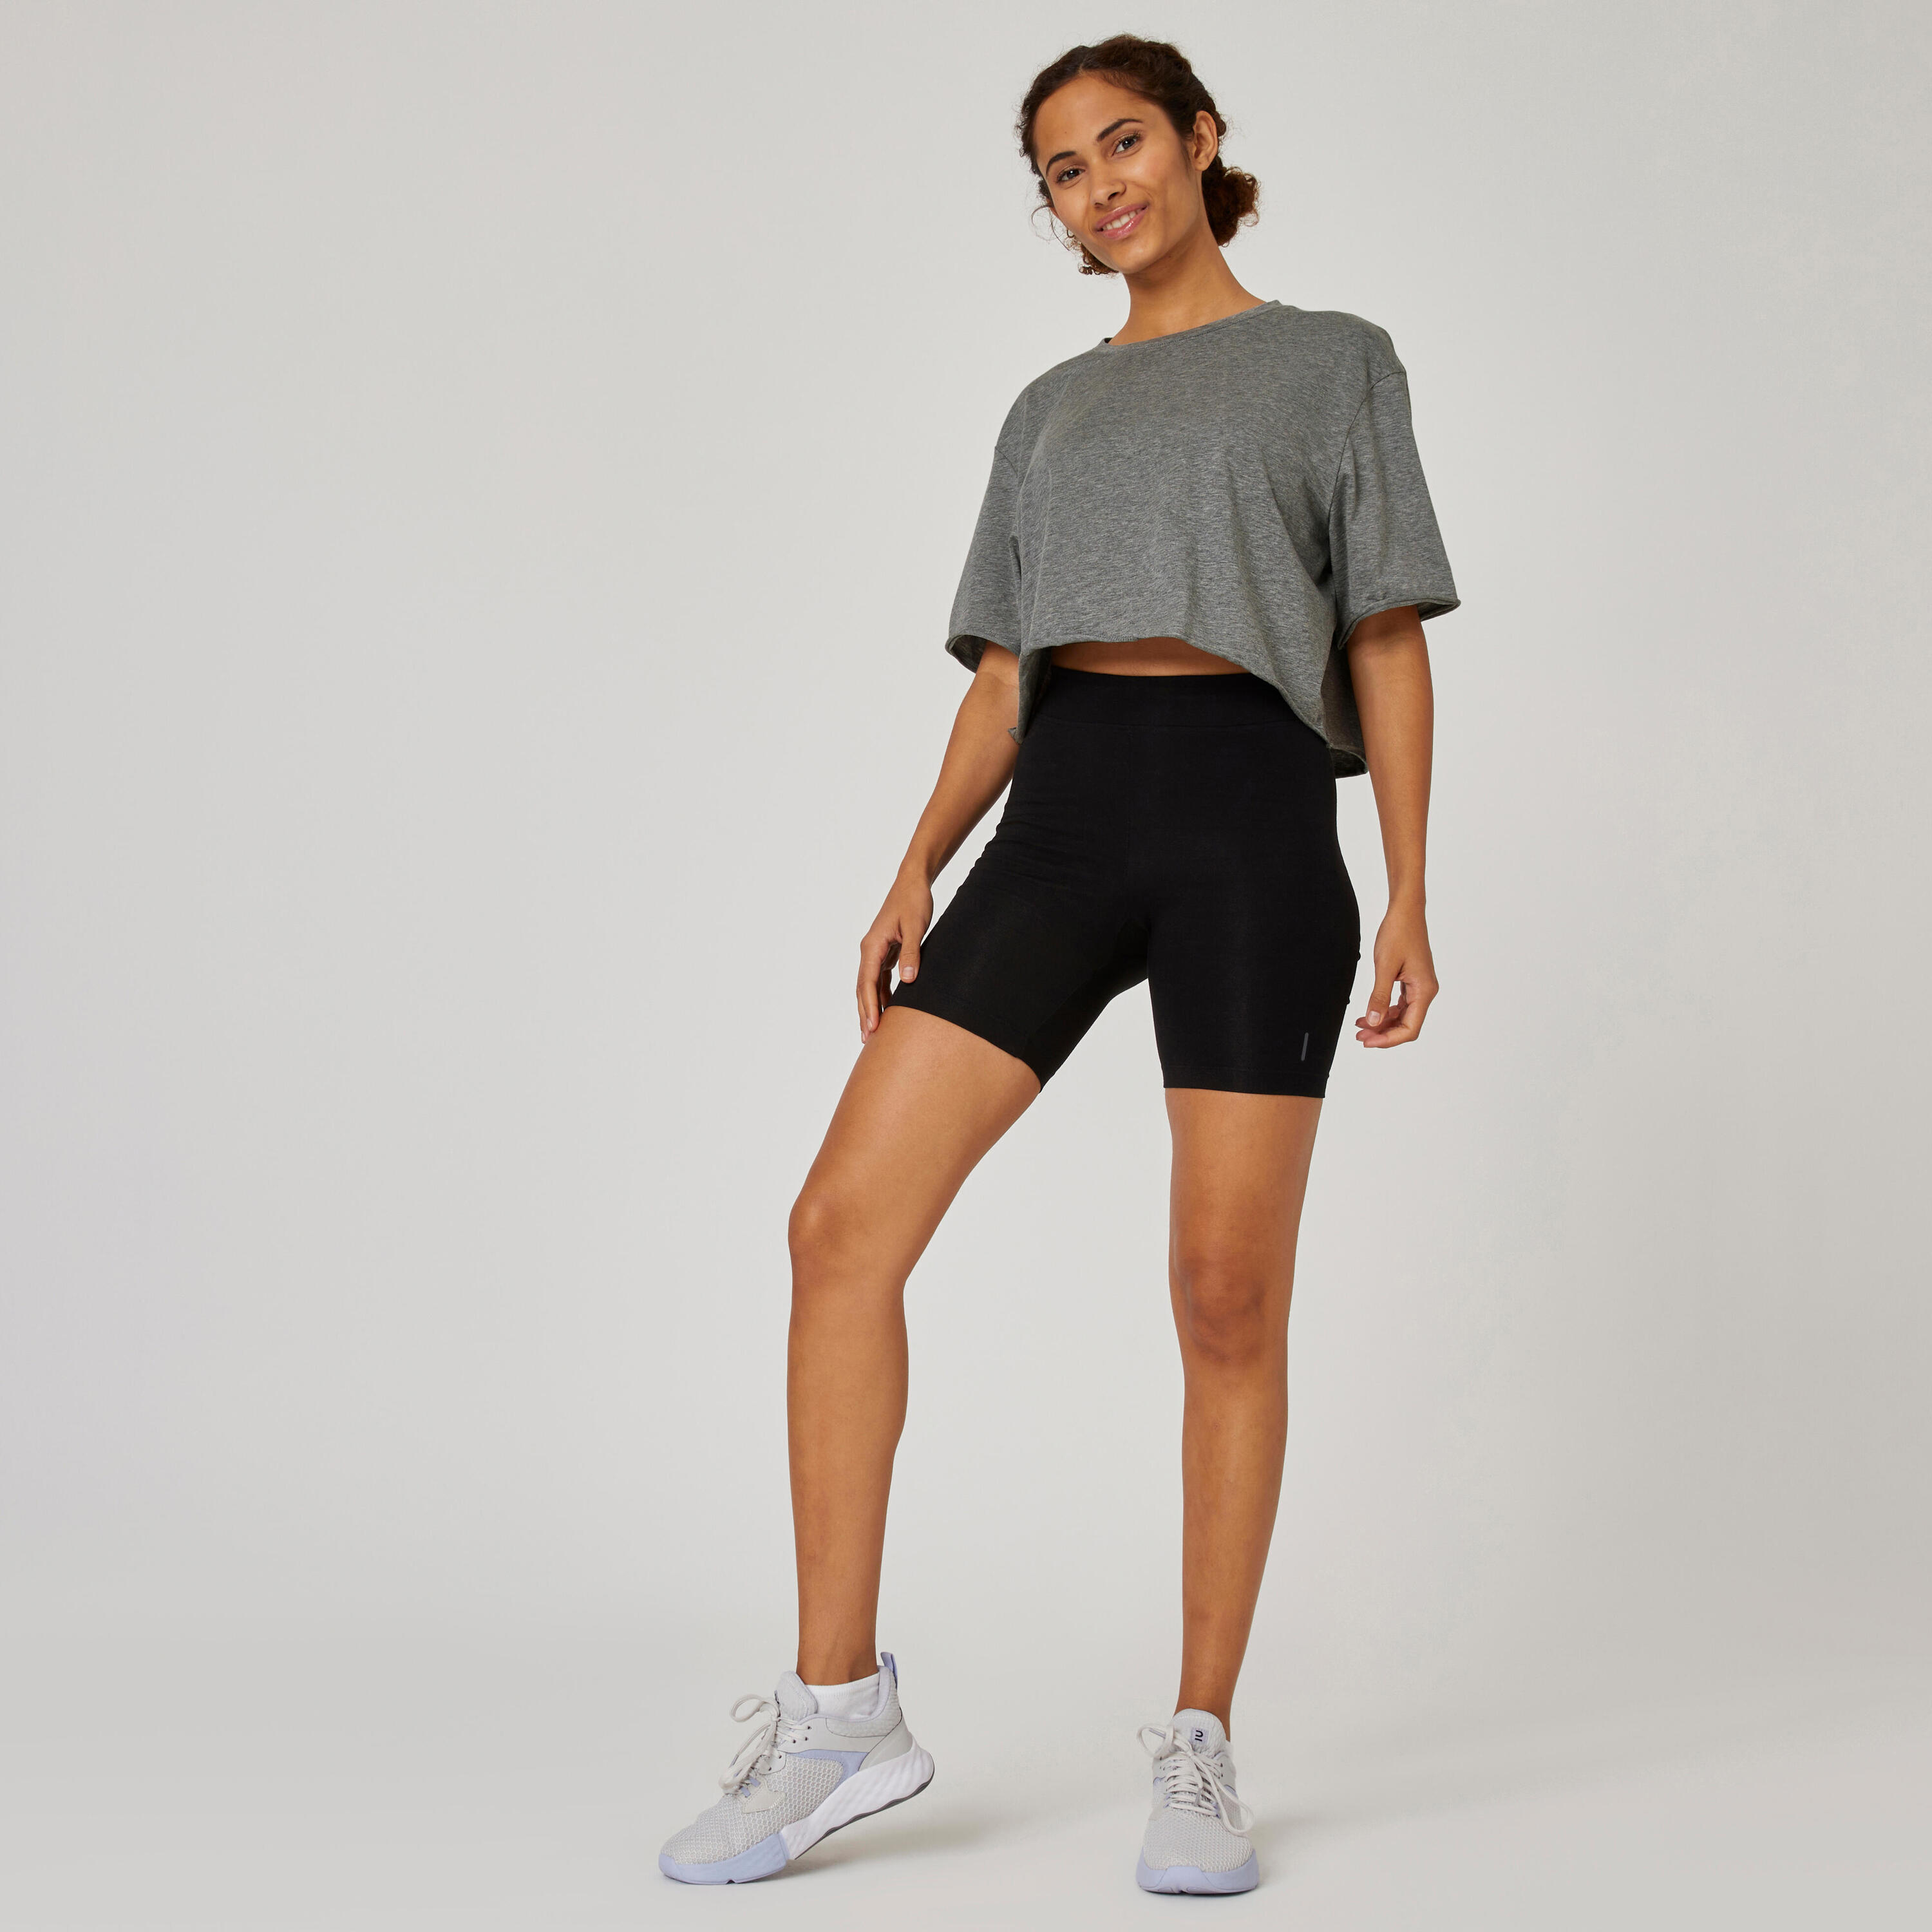 Women's Fitness Cropped T-Shirt 520 - Grey 5/8